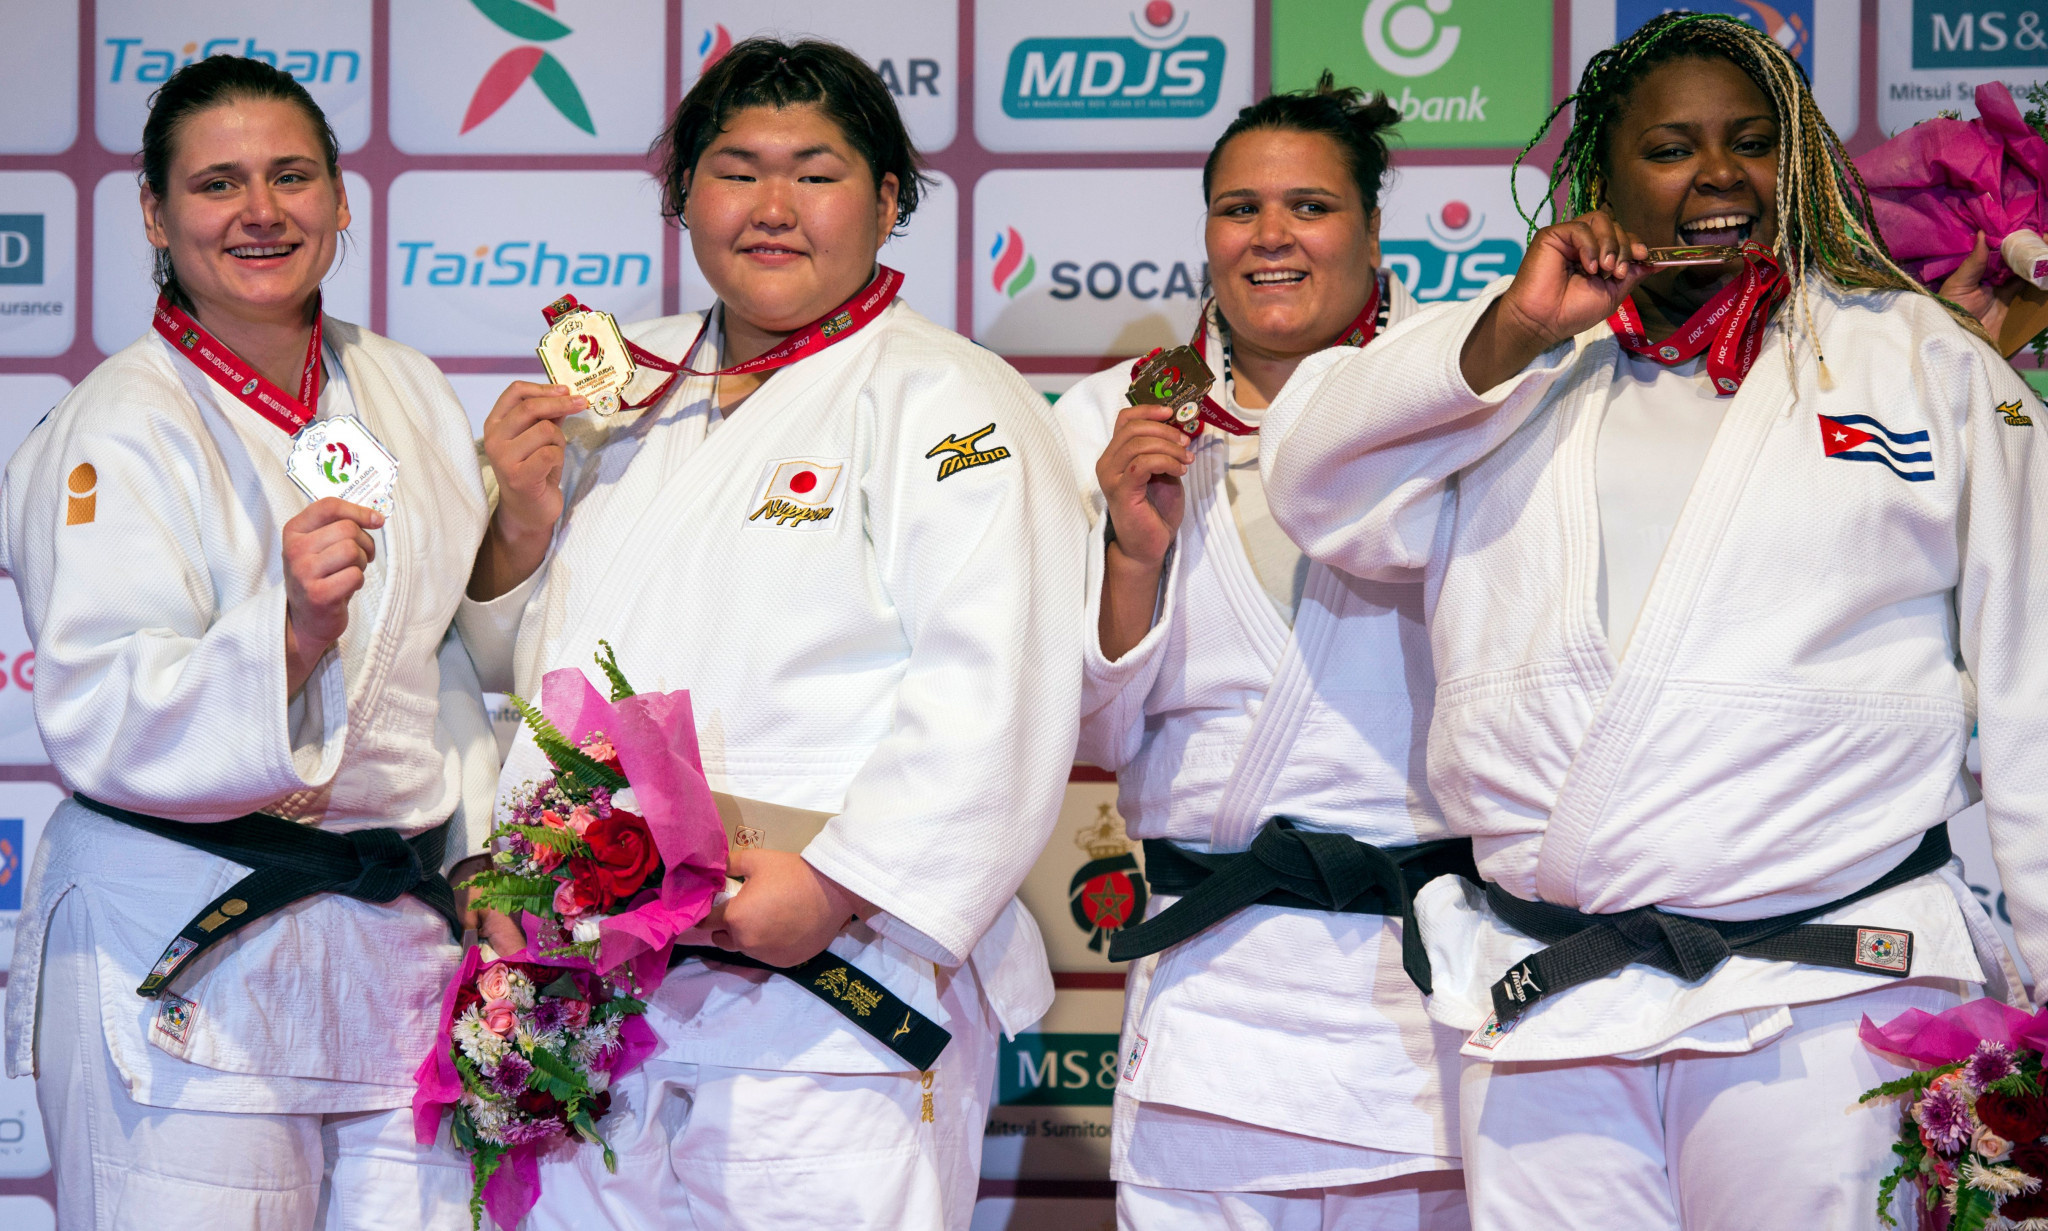 Bosnia's silver medallist Larisa Ceric, Japan's gold medallist Sarah Asahina, Tunisia's bronze medallist Nihel Cheikh Rouhou and Cuba's bronze medallist Idalys Ortiz pose on the podium with their medals following their women's Judo World Championships Open in Marrakesh ©Getty Images